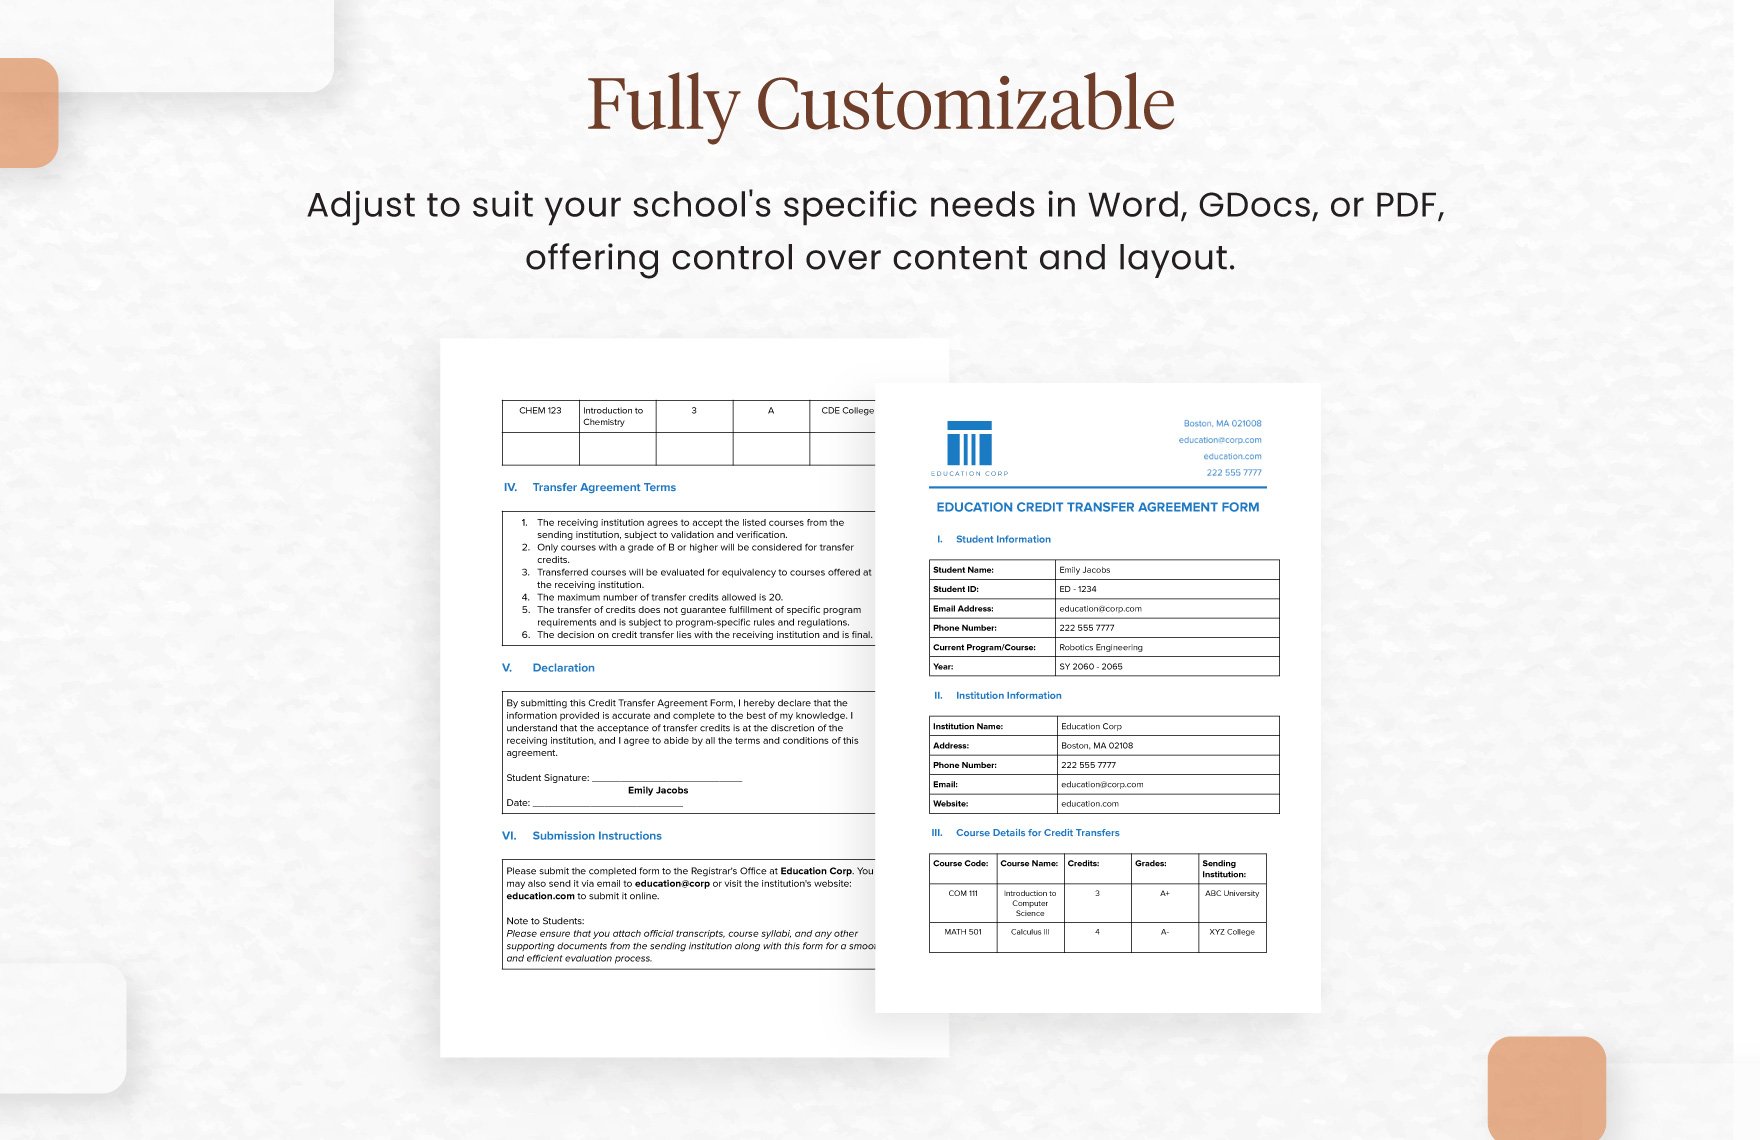 Education Credit Transfer Agreement Form Template